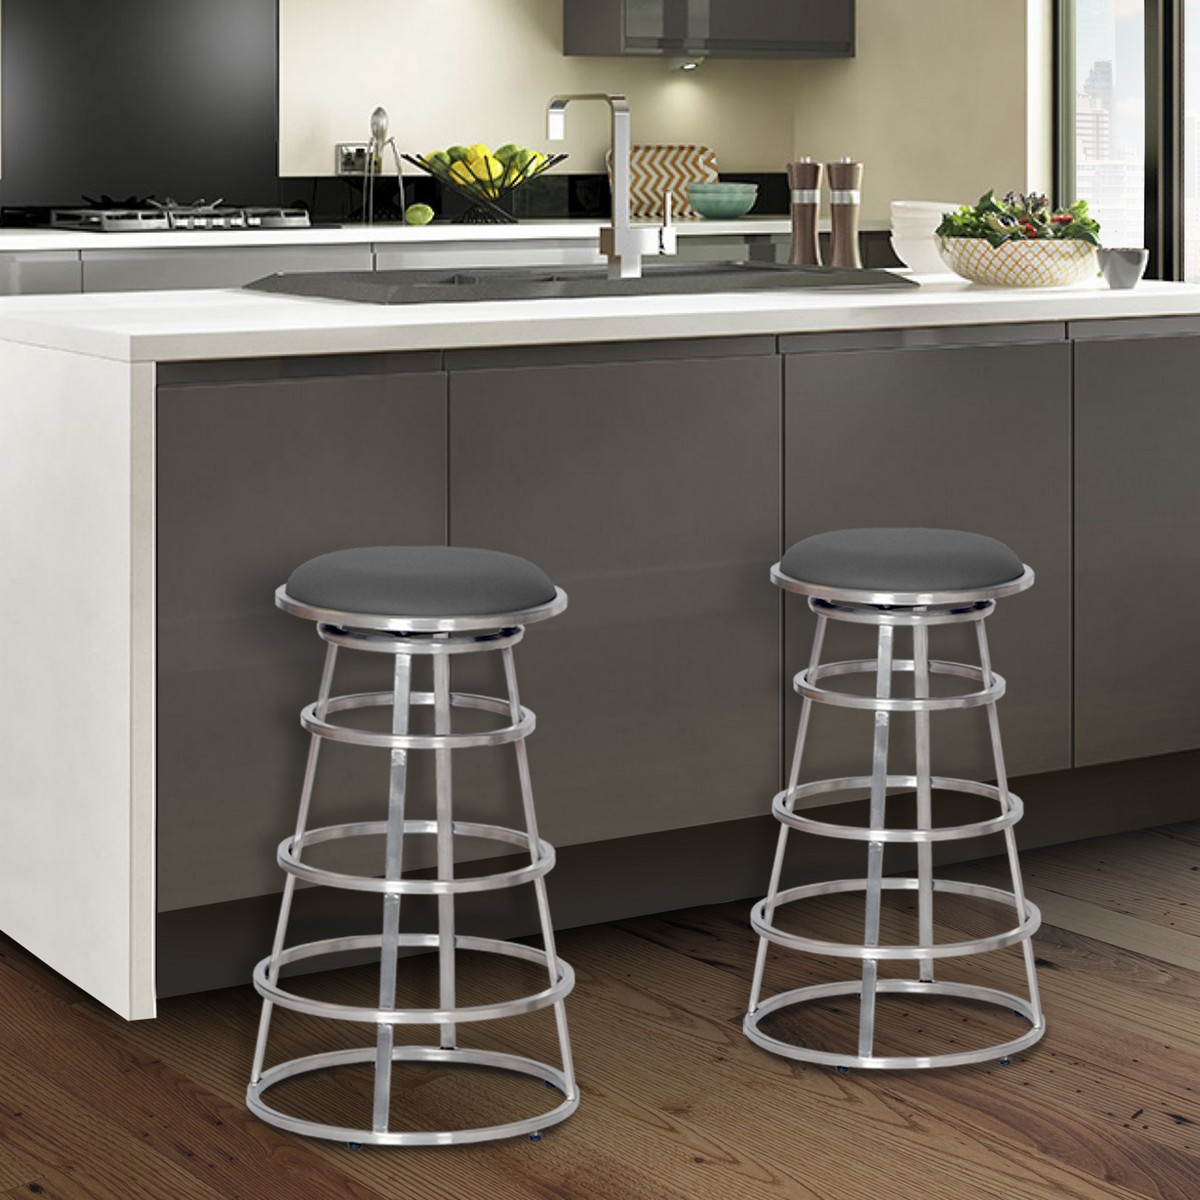 Armen Living Ringo 26-inch Backless Brushed Stainless Steel Barstool in Gray Leatherette